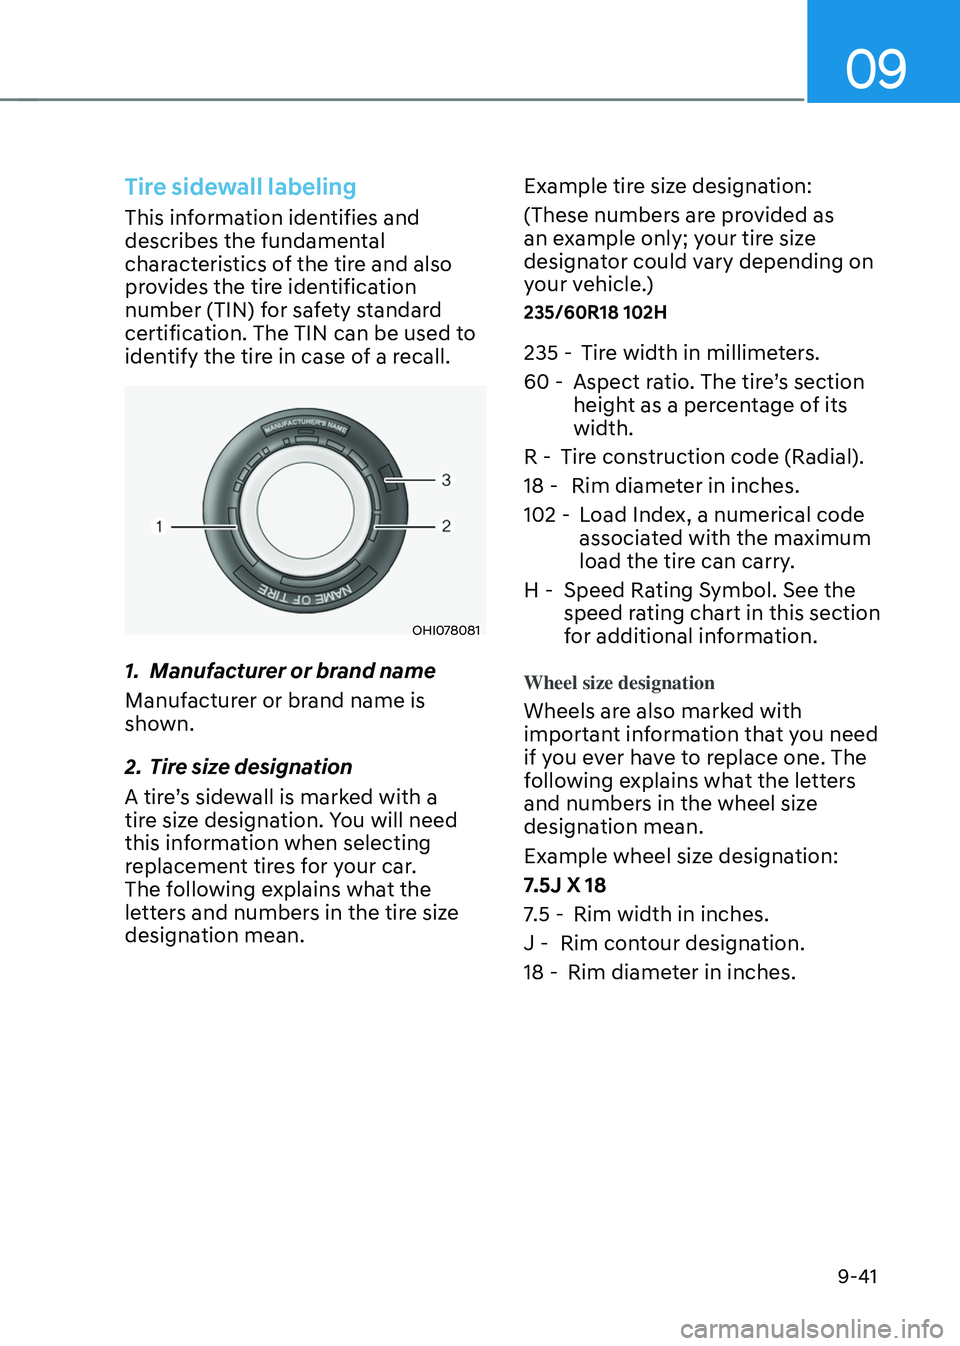 HYUNDAI TUCSON 2022 User Guide 09
9-41
Tire sidewall labeling
This information identifies and 
describes the fundamental 
characteristics of the tire and also 
provides the tire identification 
number (TIN) for safety standard 
cer